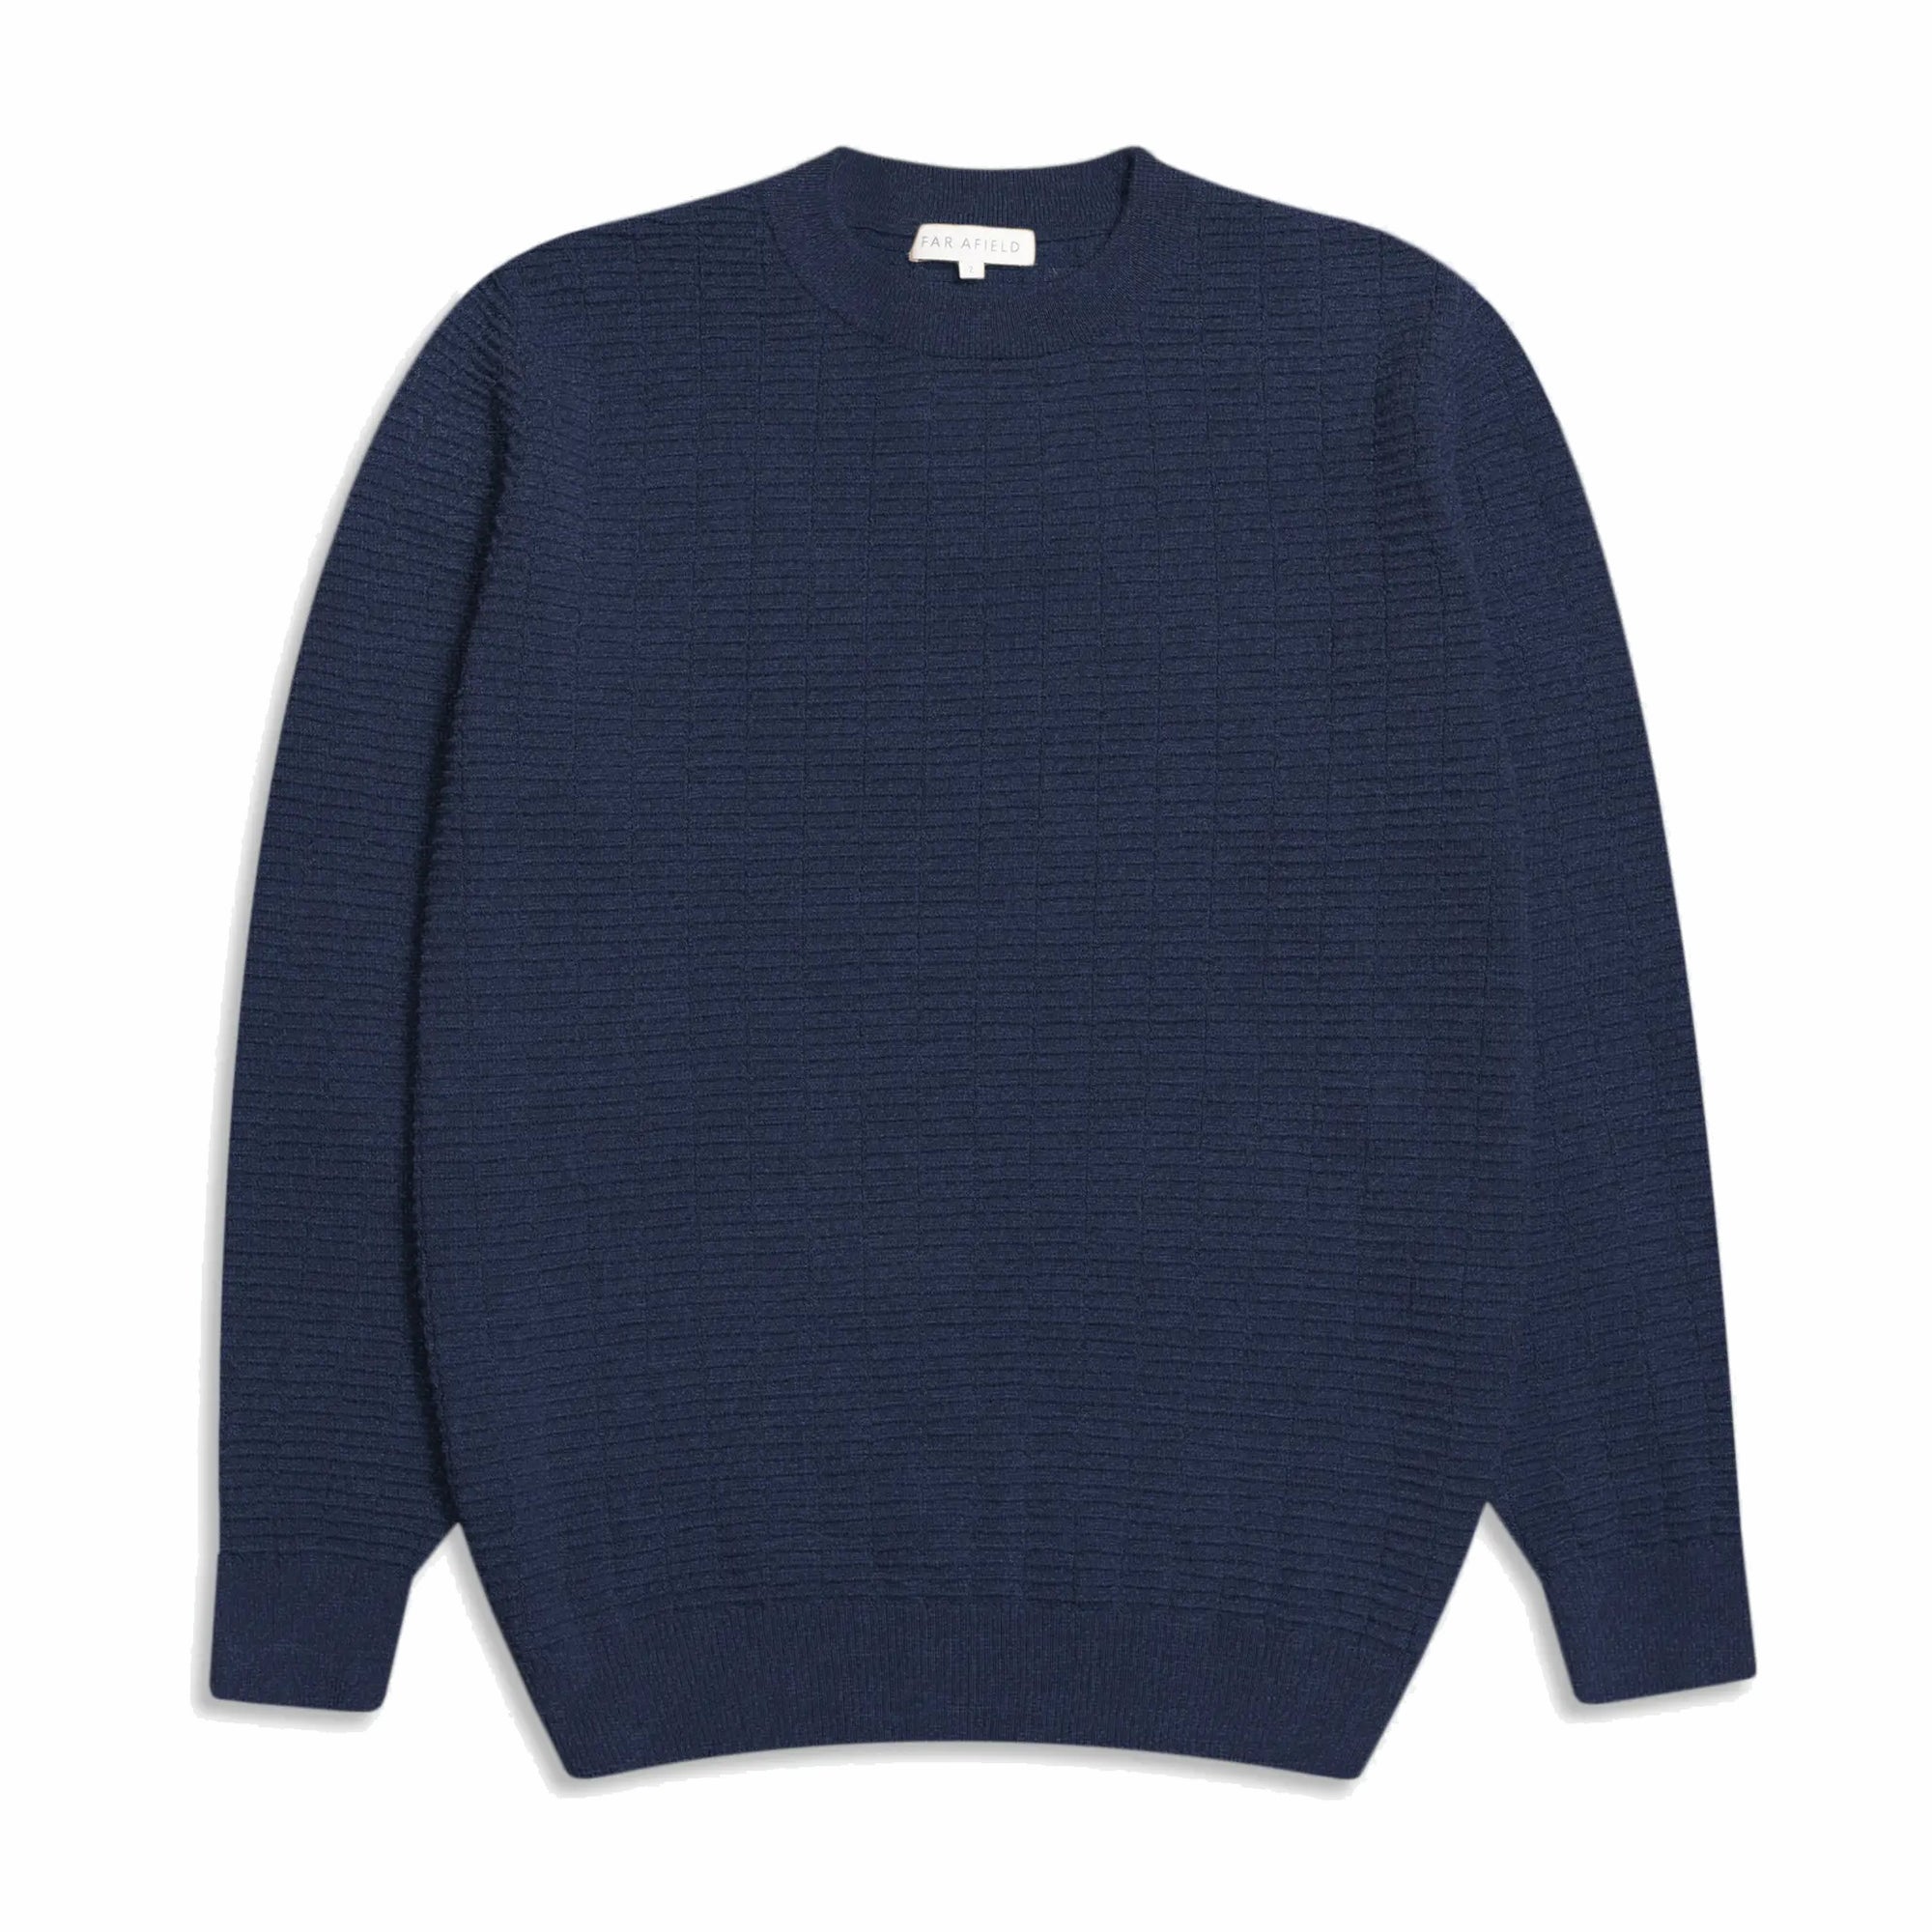 Vitor Ribbed Crewneck NAVY
A mid-weight pullover that’s been given a satisfying stretch and texture, thanks to the waffle knit technique. Made in Istanbul from an Italian Merino wool blend.
– Italian Merino Wool blend– Non-mulesed and chlorine free certified– Elasticated cuffs, hem and neck– Regular fit, true-to-size FAR AFIELD